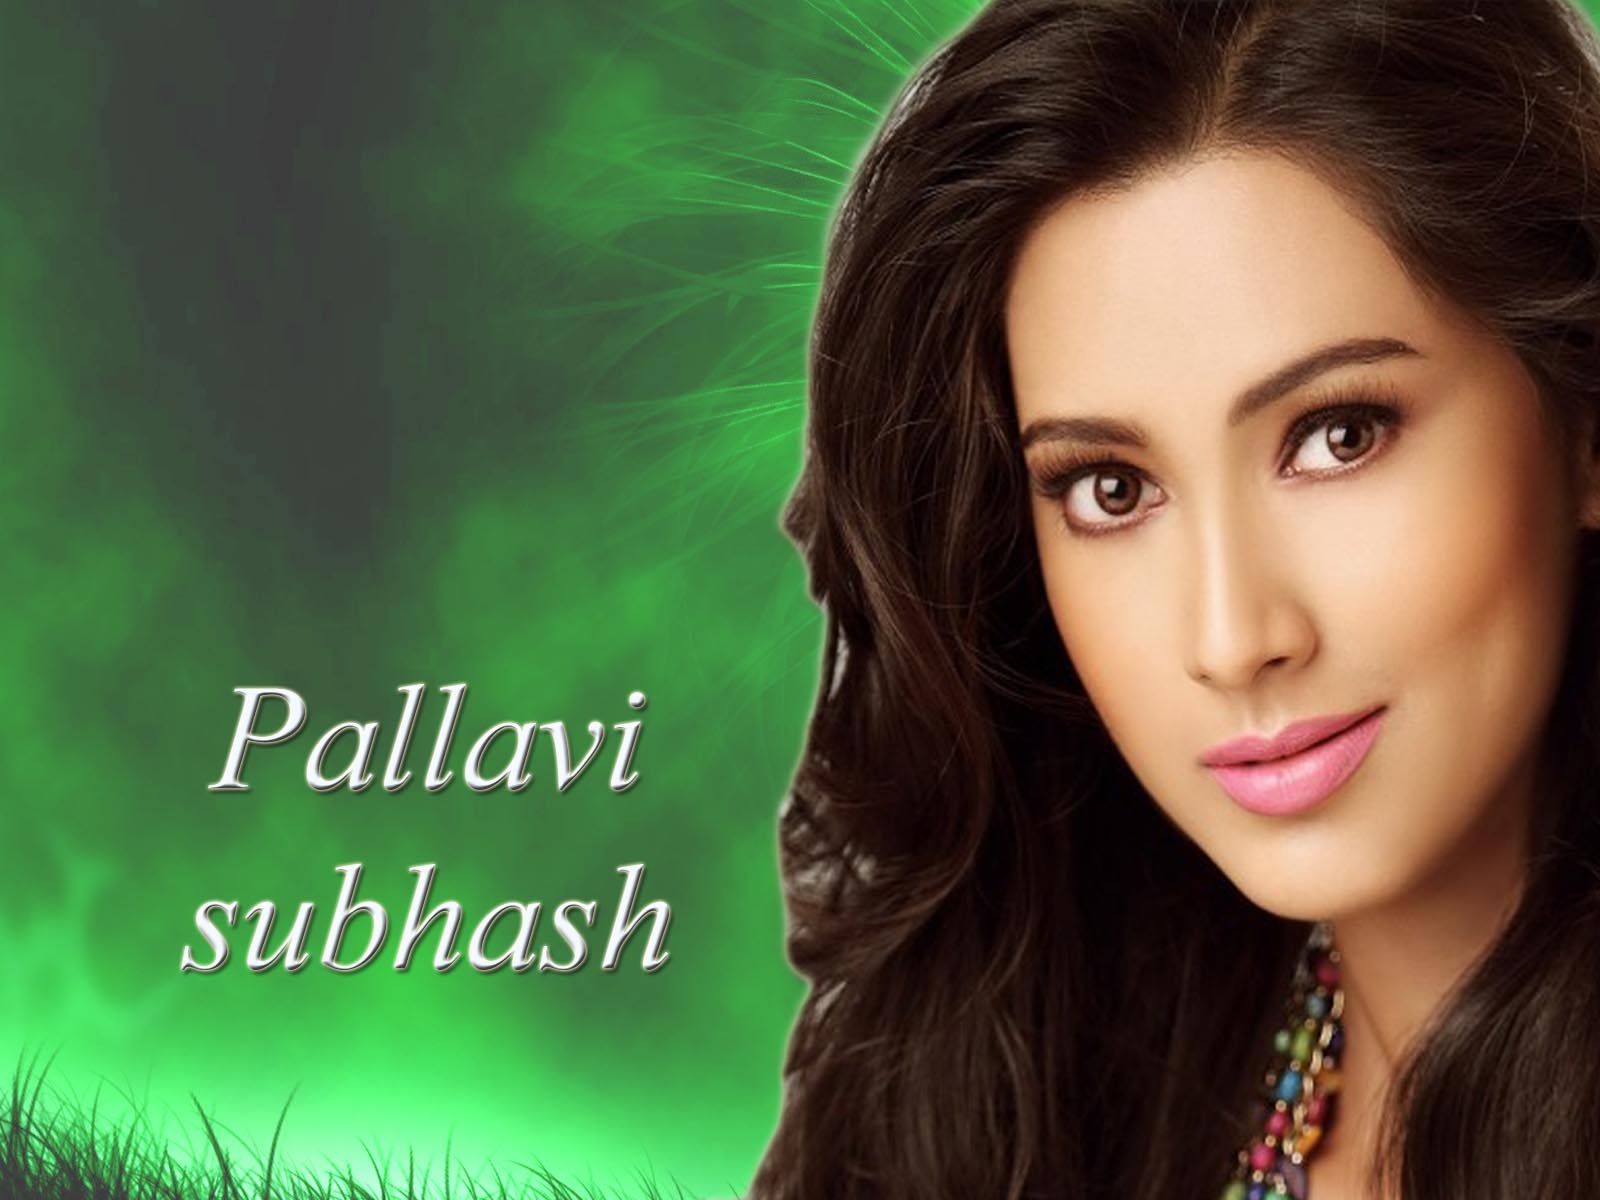 Free Download 1st Name All On People Named Pallavi Songs Books T Ideas Pics [1600x1200] For